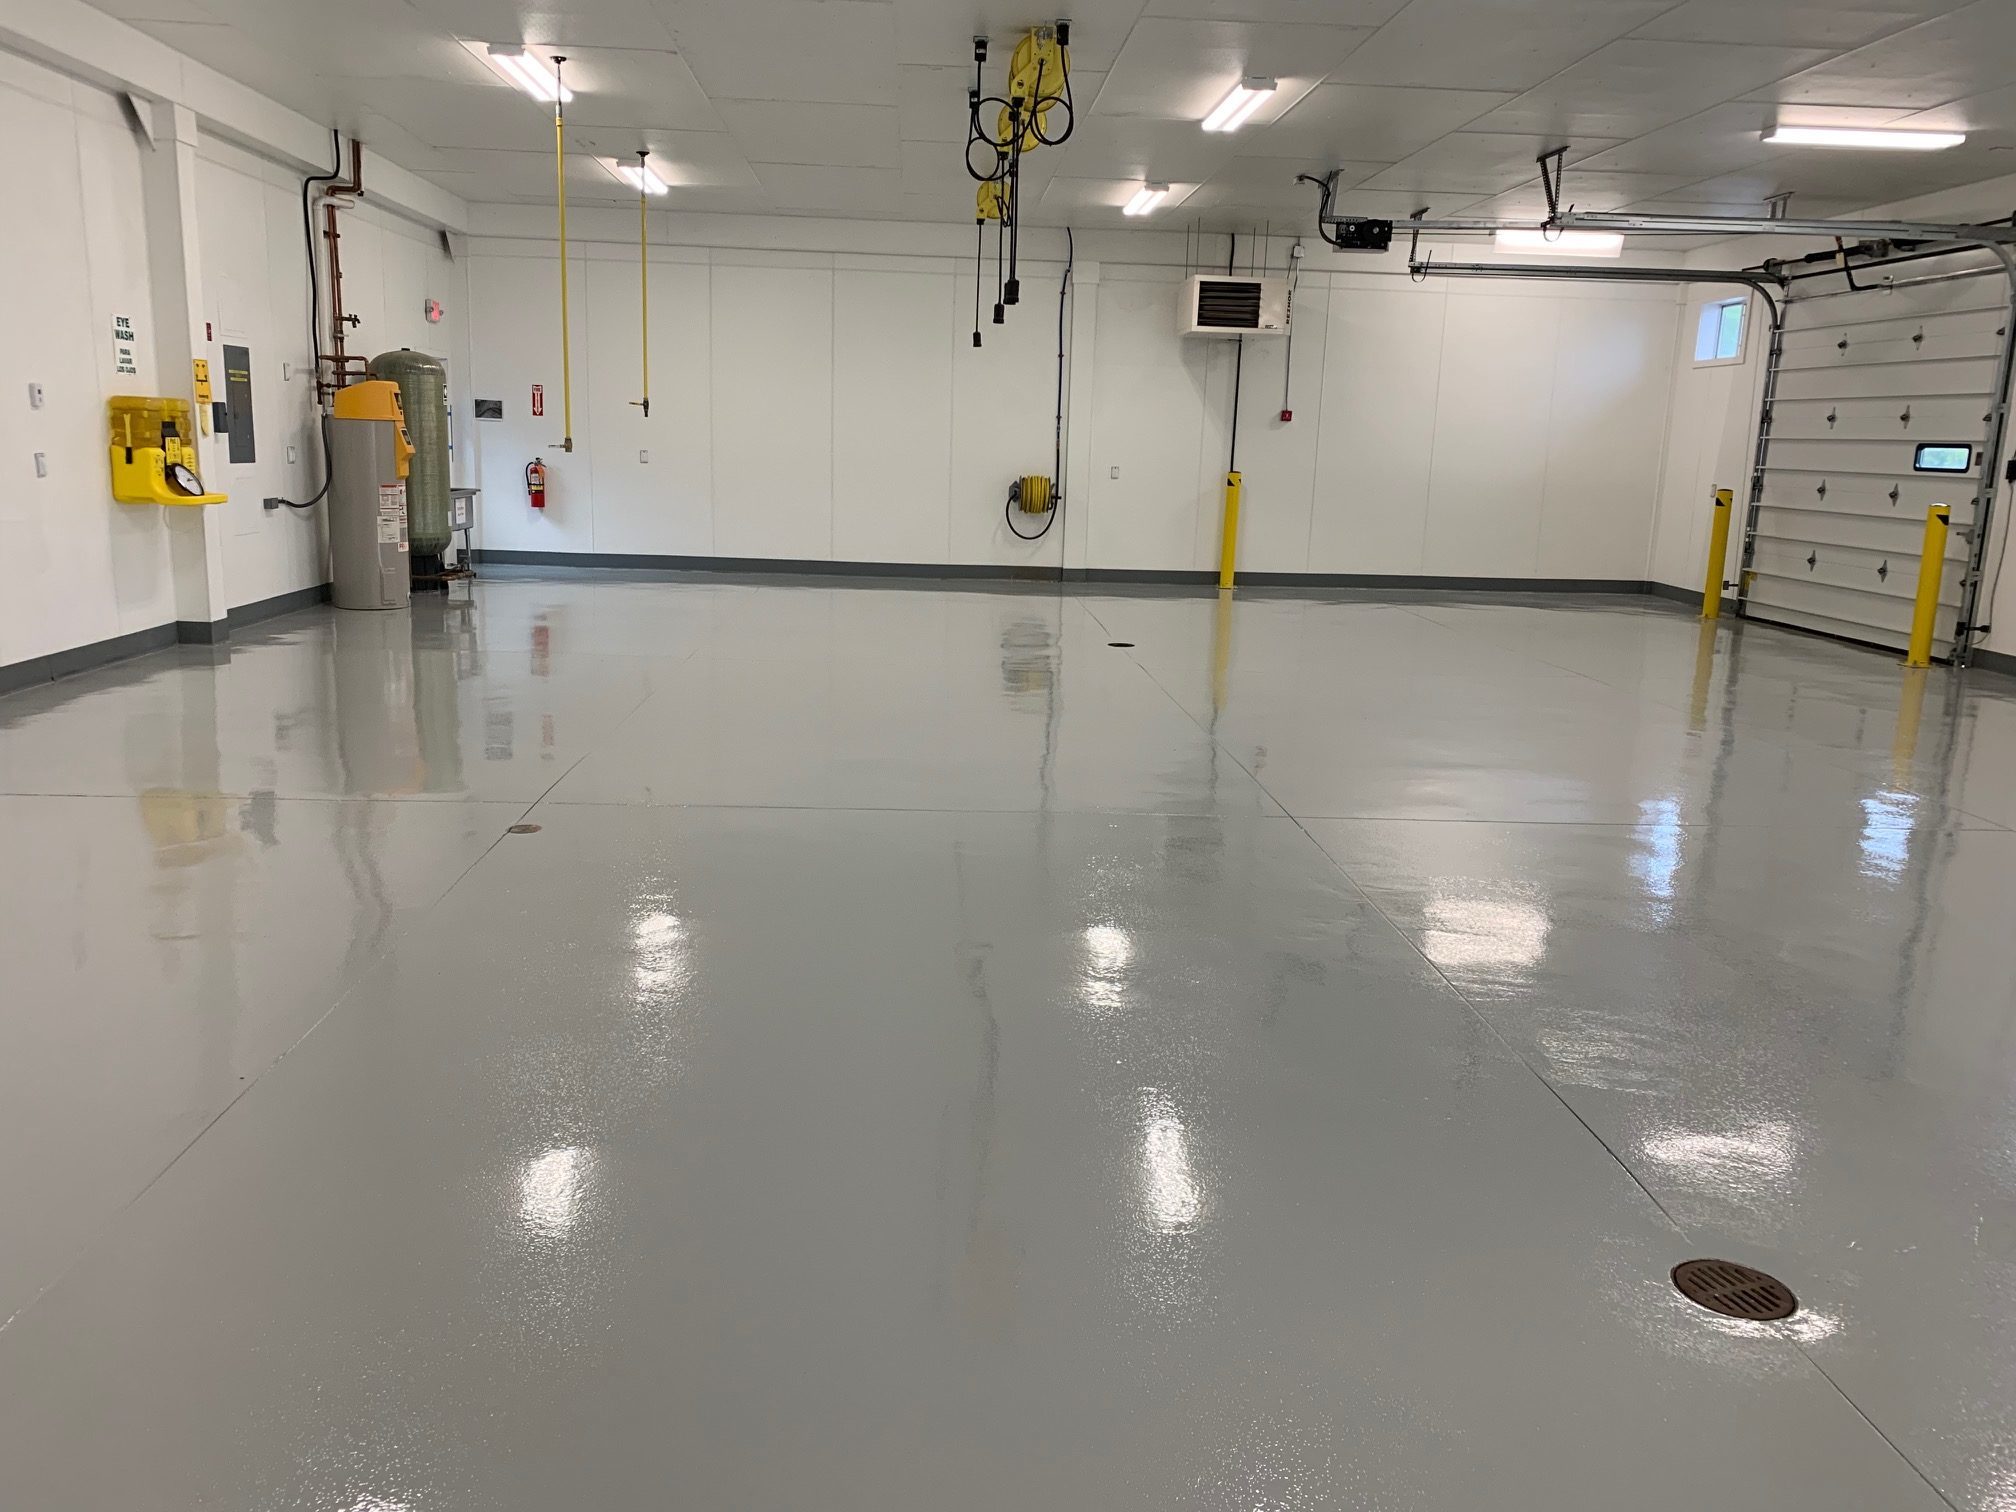 This image shows a garage with grey epoxy floor.